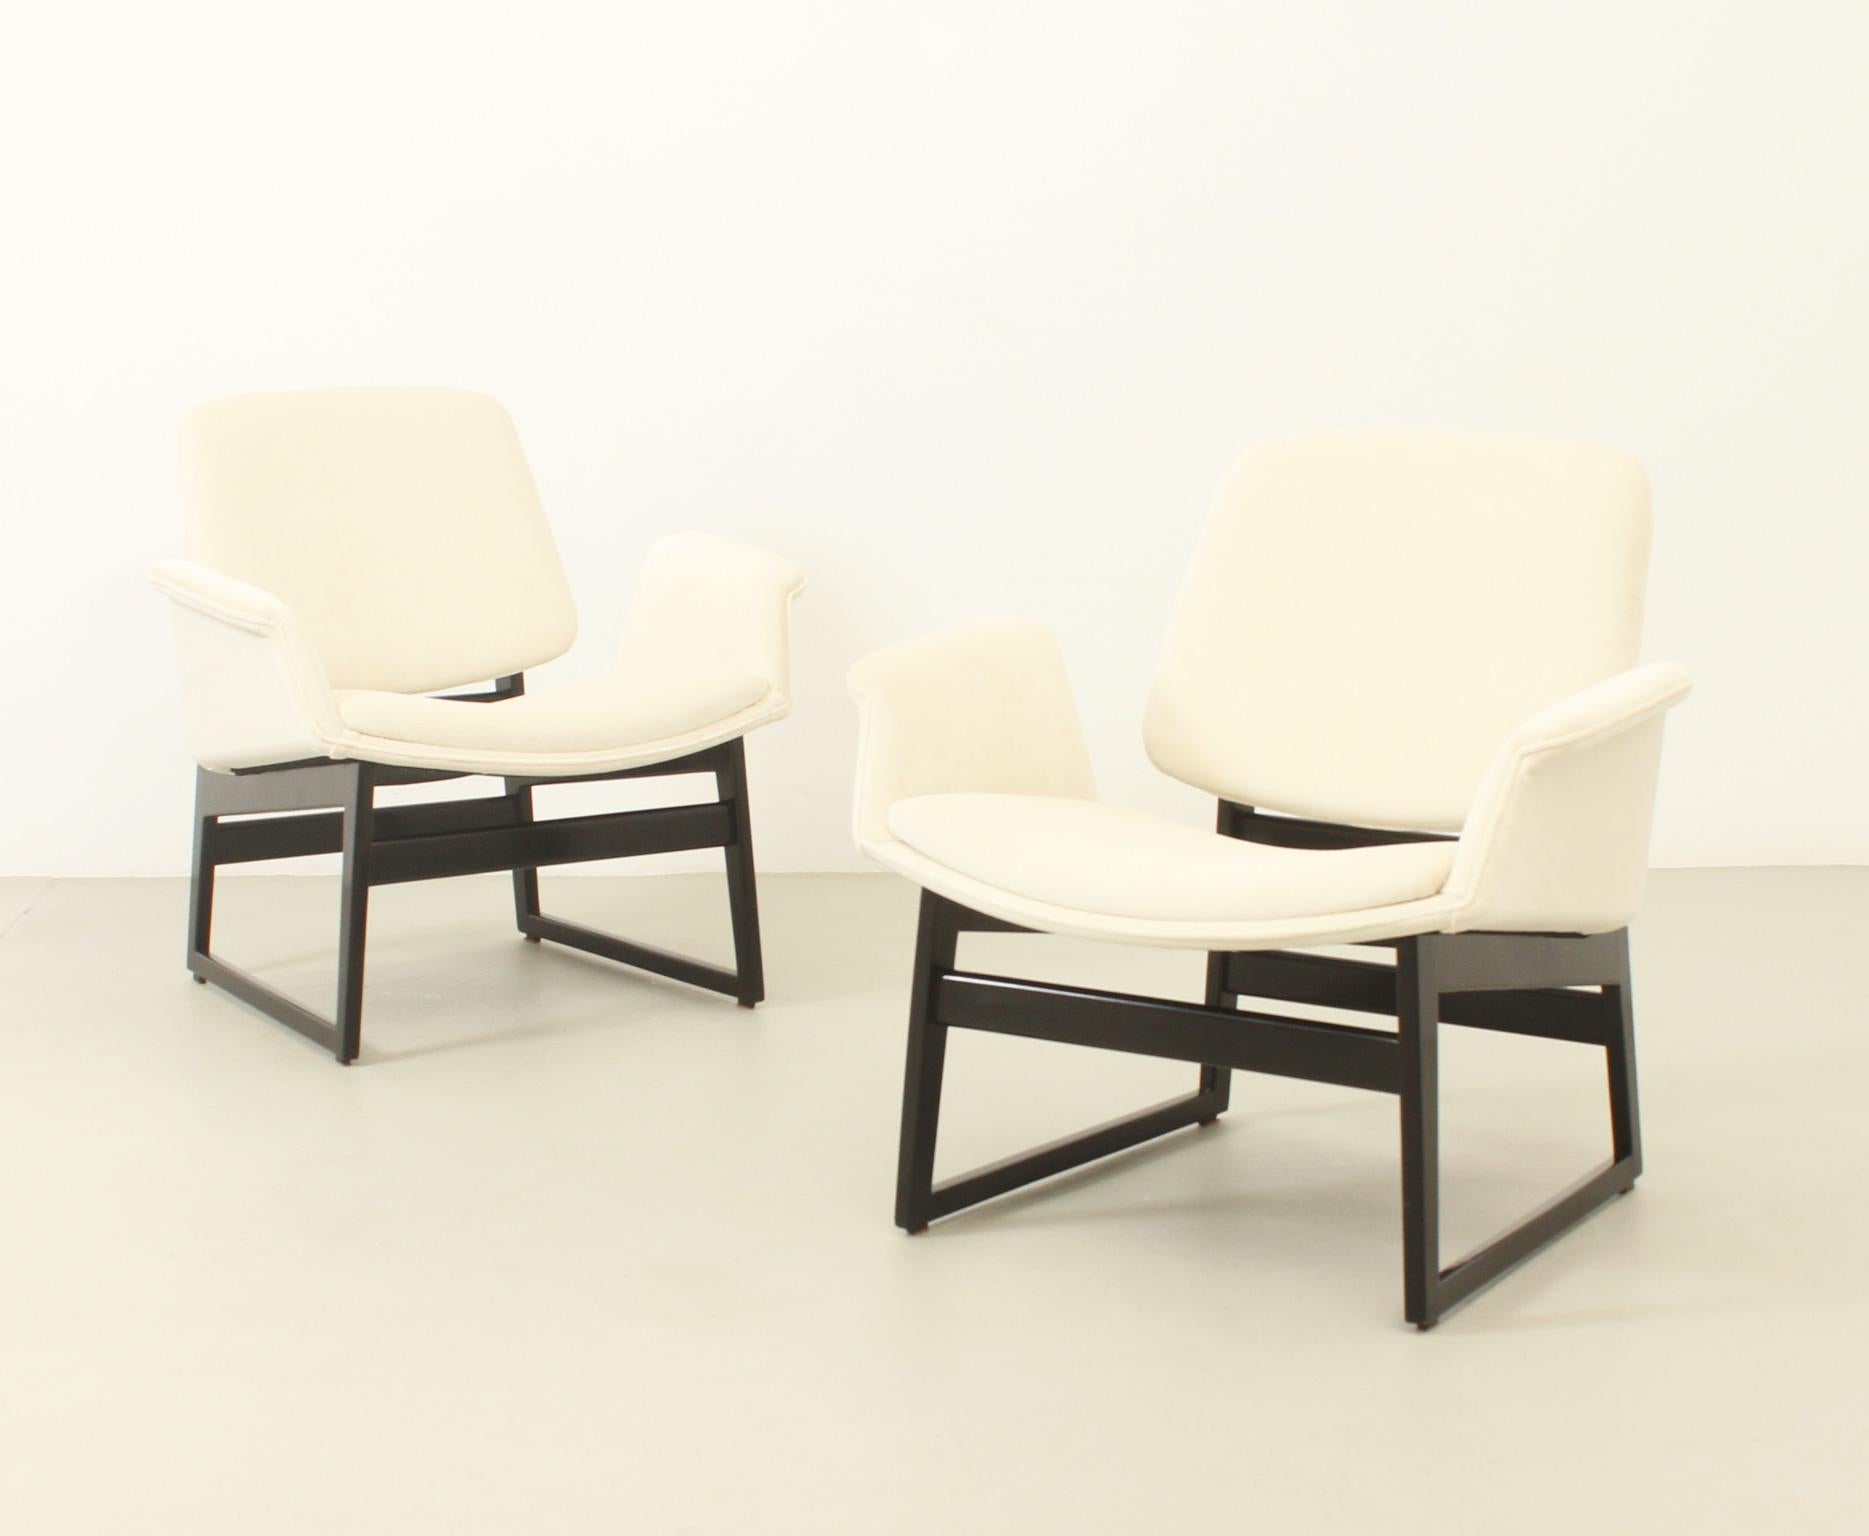 Pair of lounge chairs designed in 1960 by Illum Wikkelsø for Arflex, Italy. Wikkelsø's model 451 redesign in 1960 for Arflex, Italy with metal or wood base. This pair are with a black lacquered wooden base and new off-white velvet upholstery. 